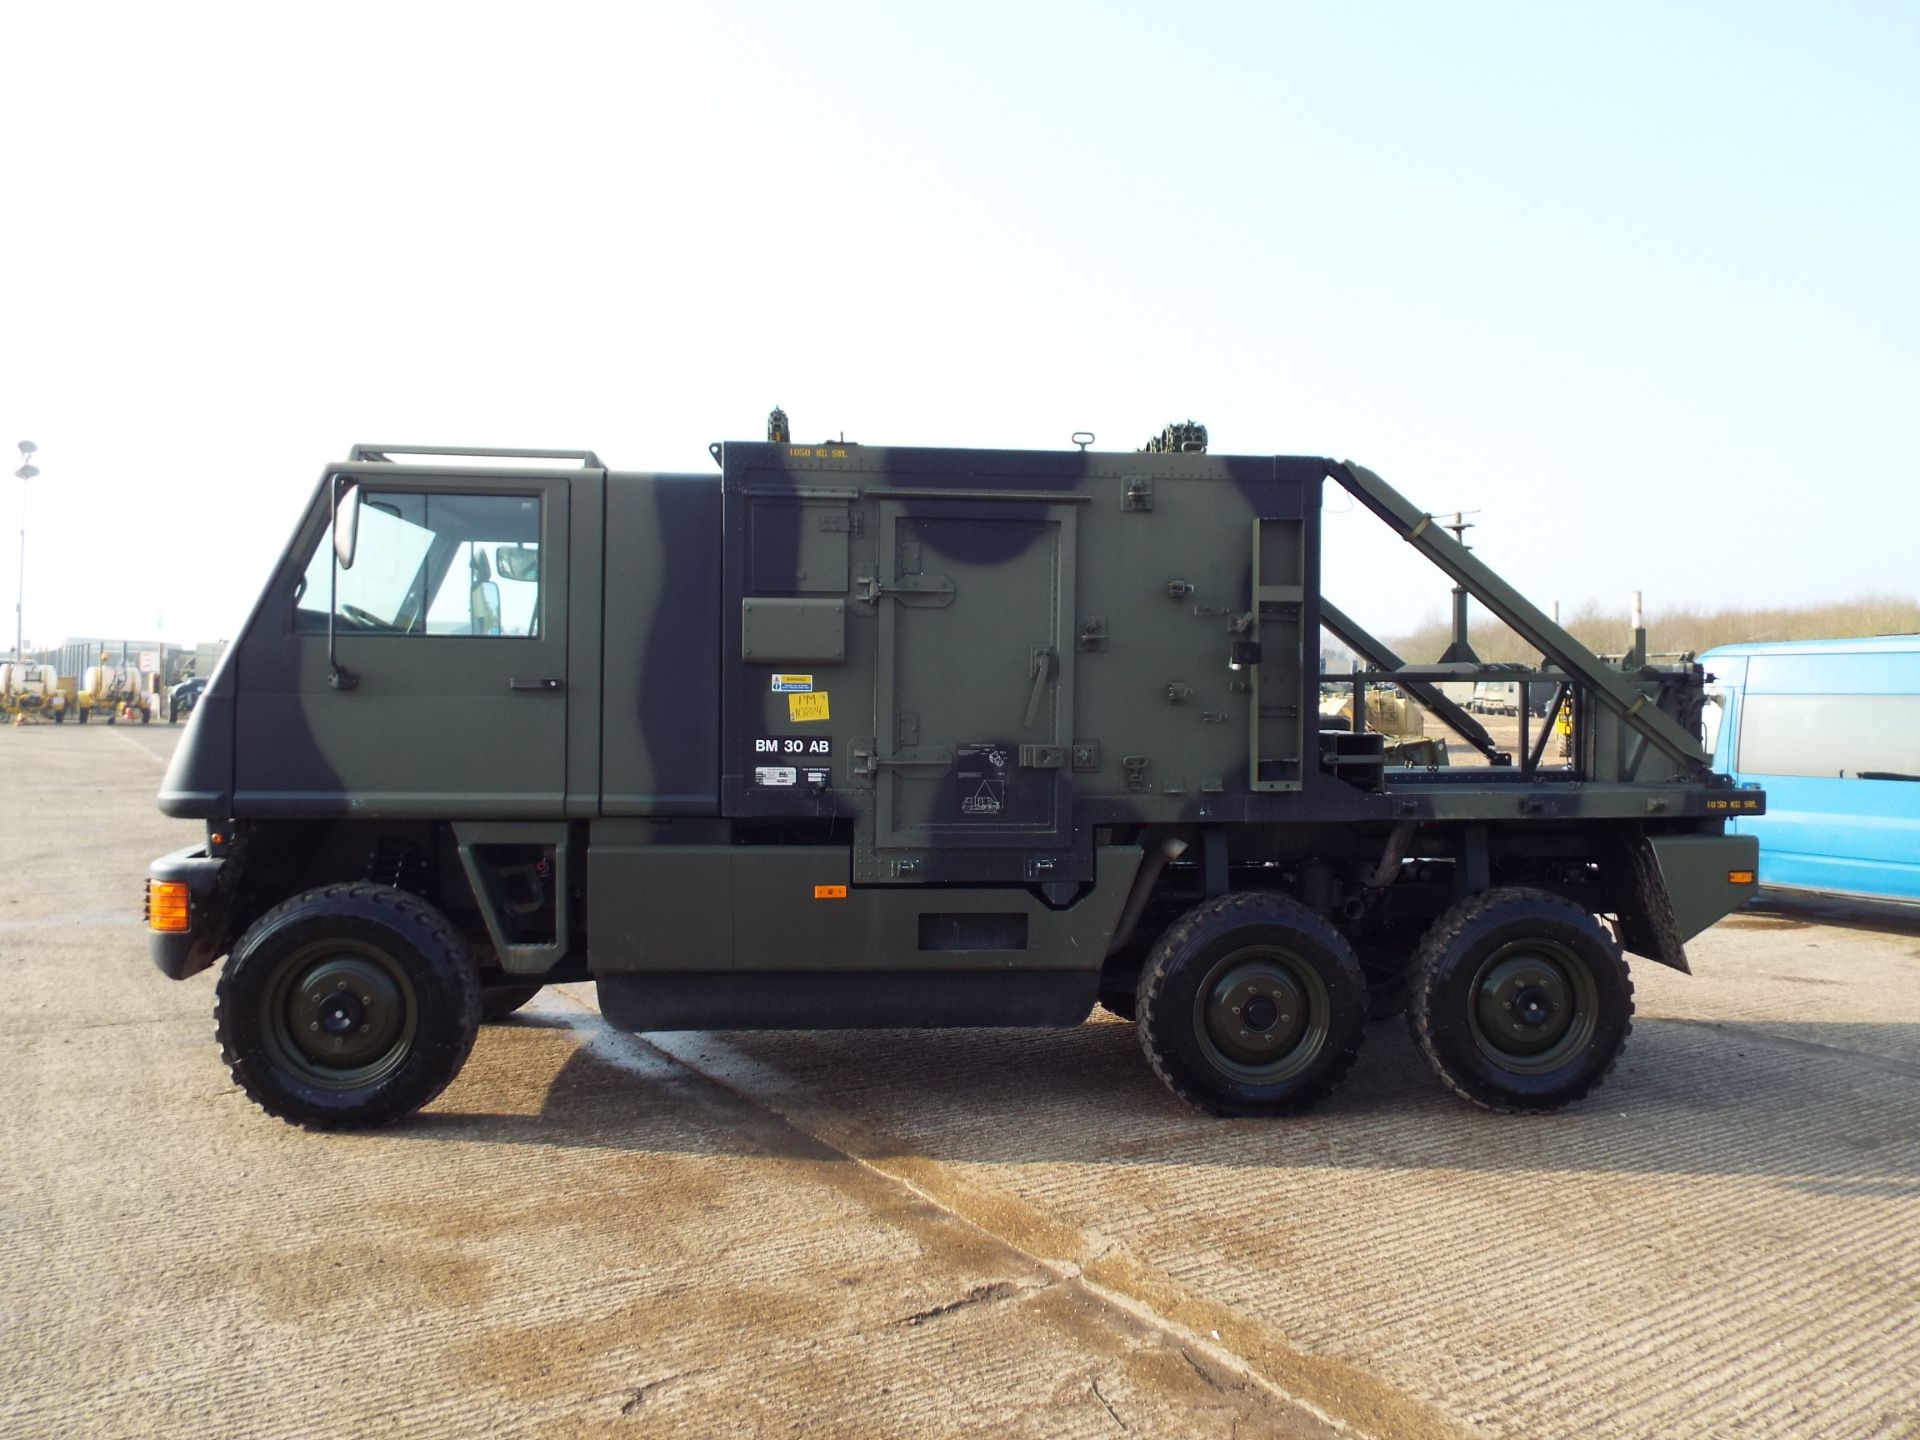 Ex Reserve Left Hand Drive Mowag Bucher Duro II 6x6 High-Mobility Tactical Vehicle - Image 4 of 31